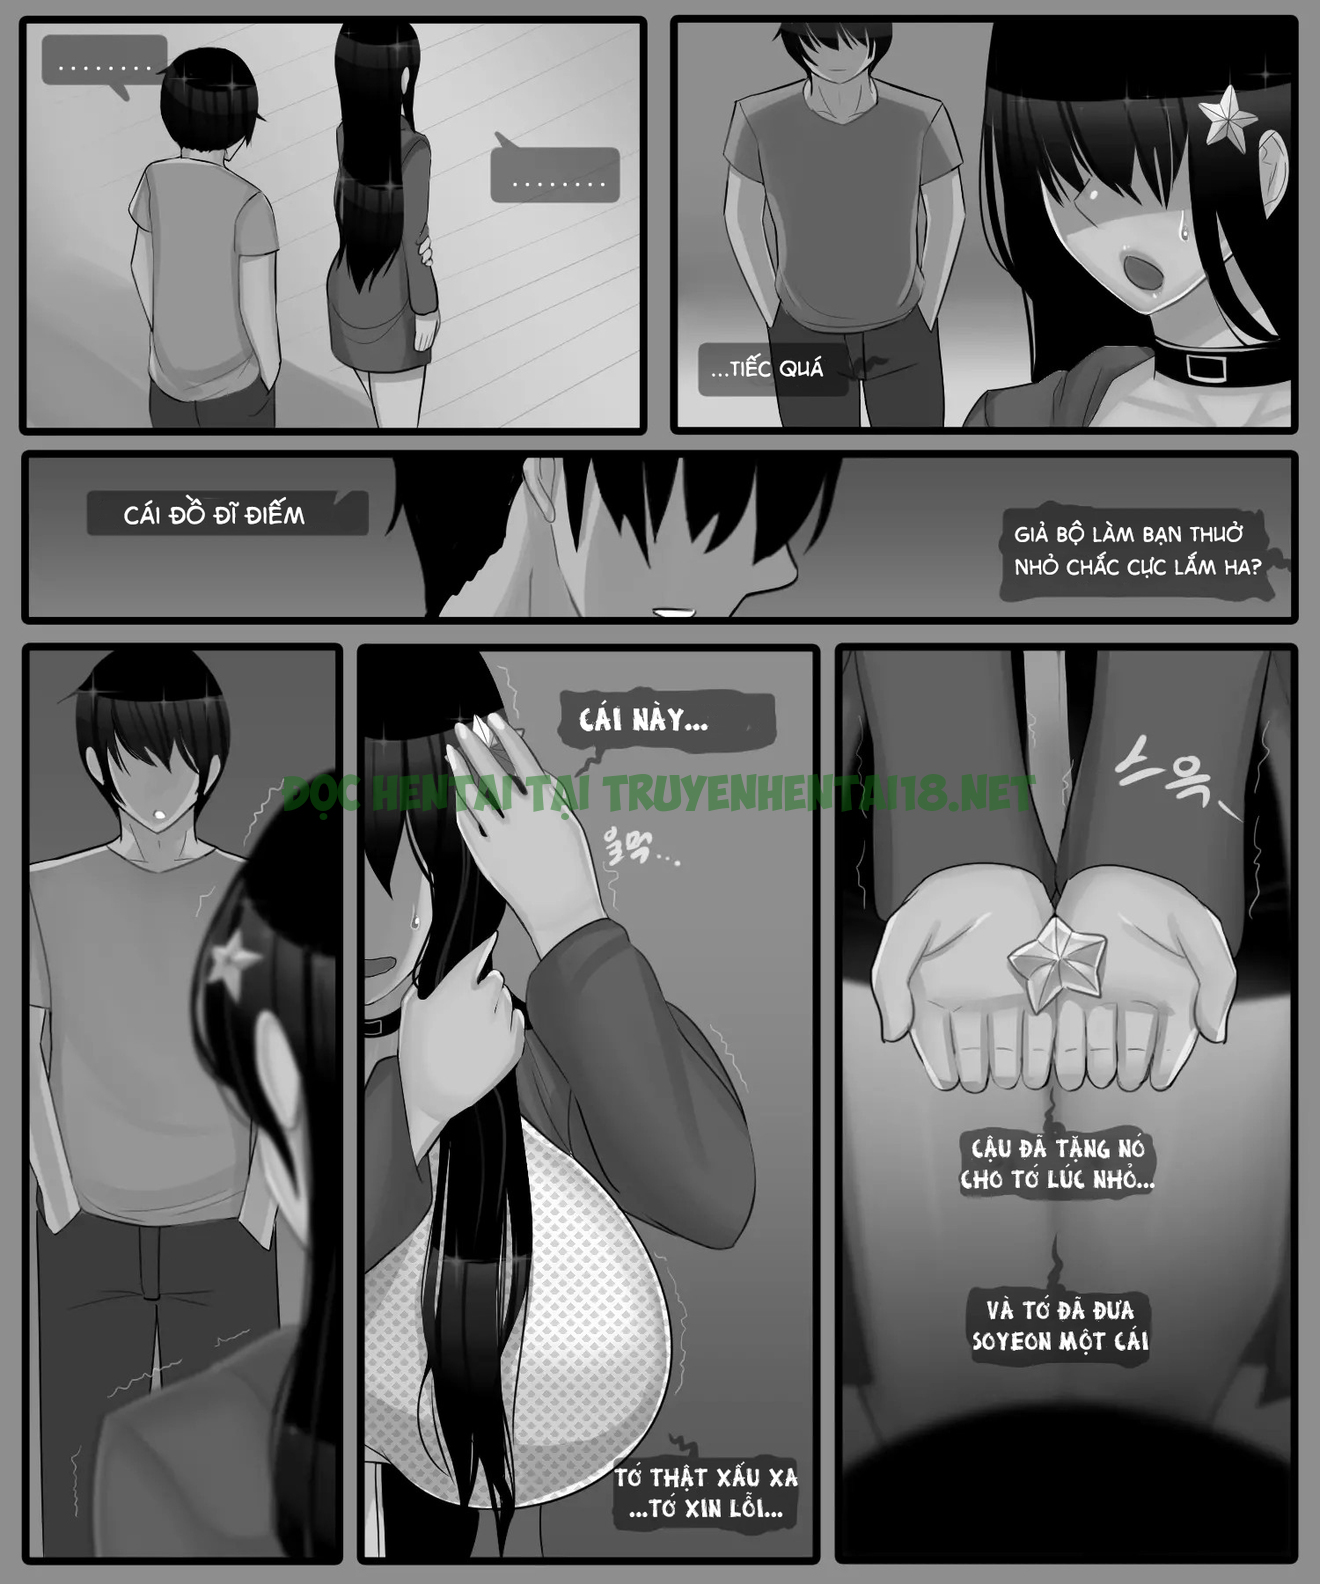 Xem ảnh The Story Of A Childhood Friend Becoming Father's Love - Chapter 2 - 6 - Hentai24h.Tv